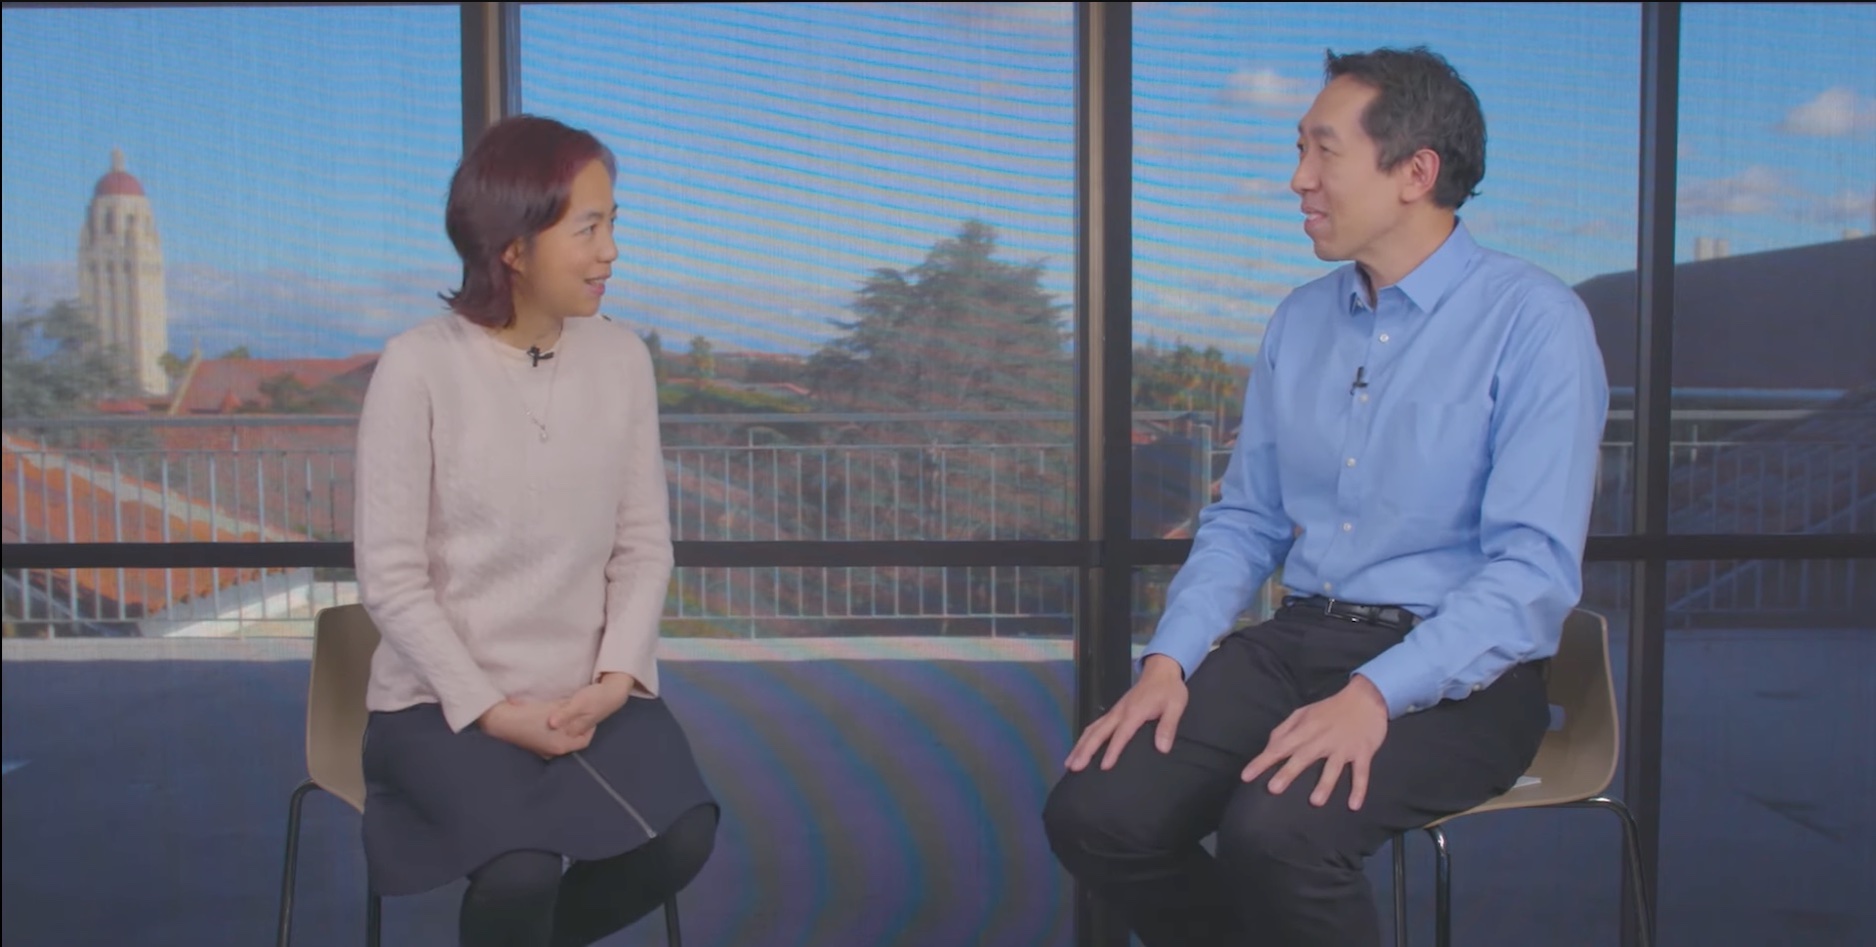 Andrew Ng and Fei-Fei Li Discuss Human-Centered Artifical Intelligence